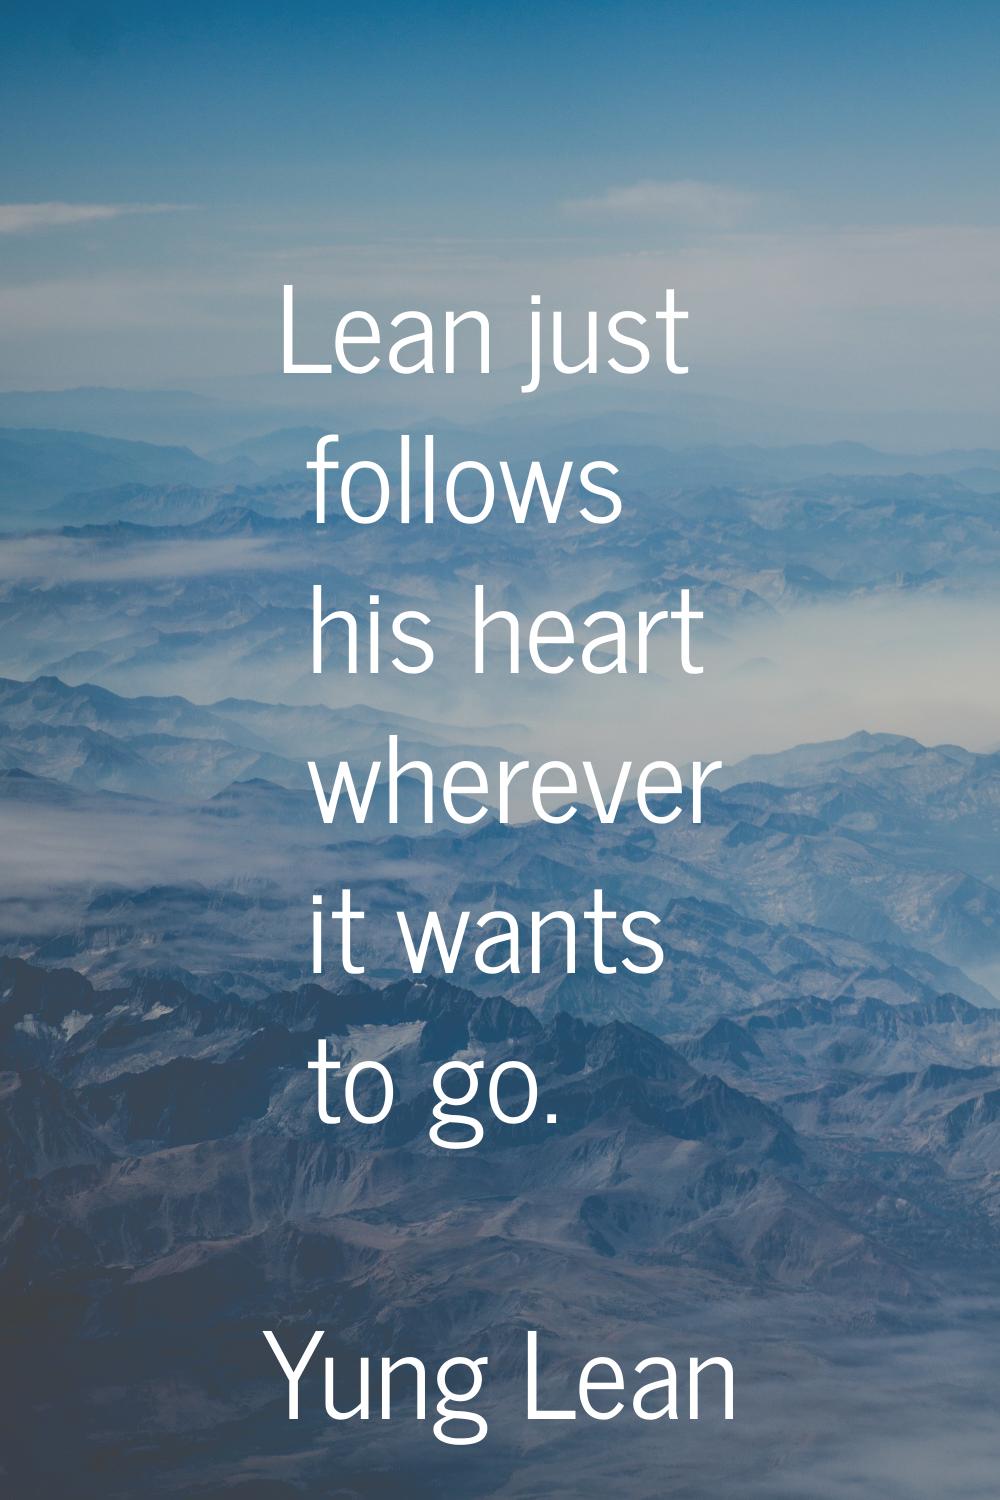 Lean just follows his heart wherever it wants to go.